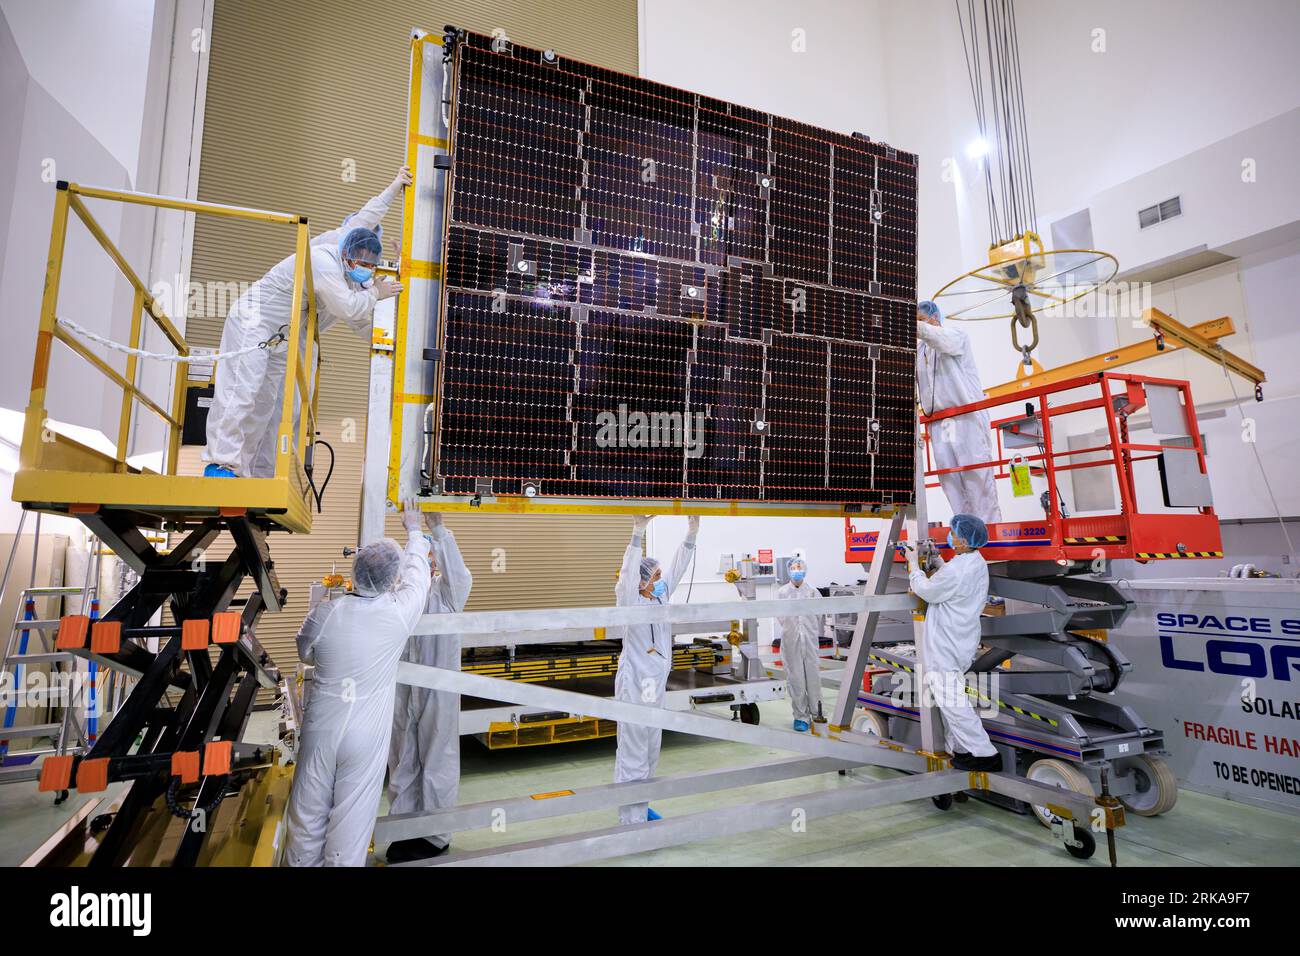 July 18, 2023 - KSC, Florida, USA - A NASA team helps attach solar arrays for the agencys Psyche spacecraft onto a stand inside the Astrotech Space Operations Facility near the agencys Kennedy Space Center in Florida on July 18, 2023. The solar arrays were shipped from Maxar Technologies, in San, Jose, California. They are part of the solar electric propulsion system, provided by Maxar, that will power the spacecraft on its journey to explore a metal-rich asteroid. Psyche will launch atop a SpaceX Falcon Heavy rocket from Launch Complex 39A at Kennedy. Launch is targeted for Oct. 5, 2023. Ridi Stock Photo